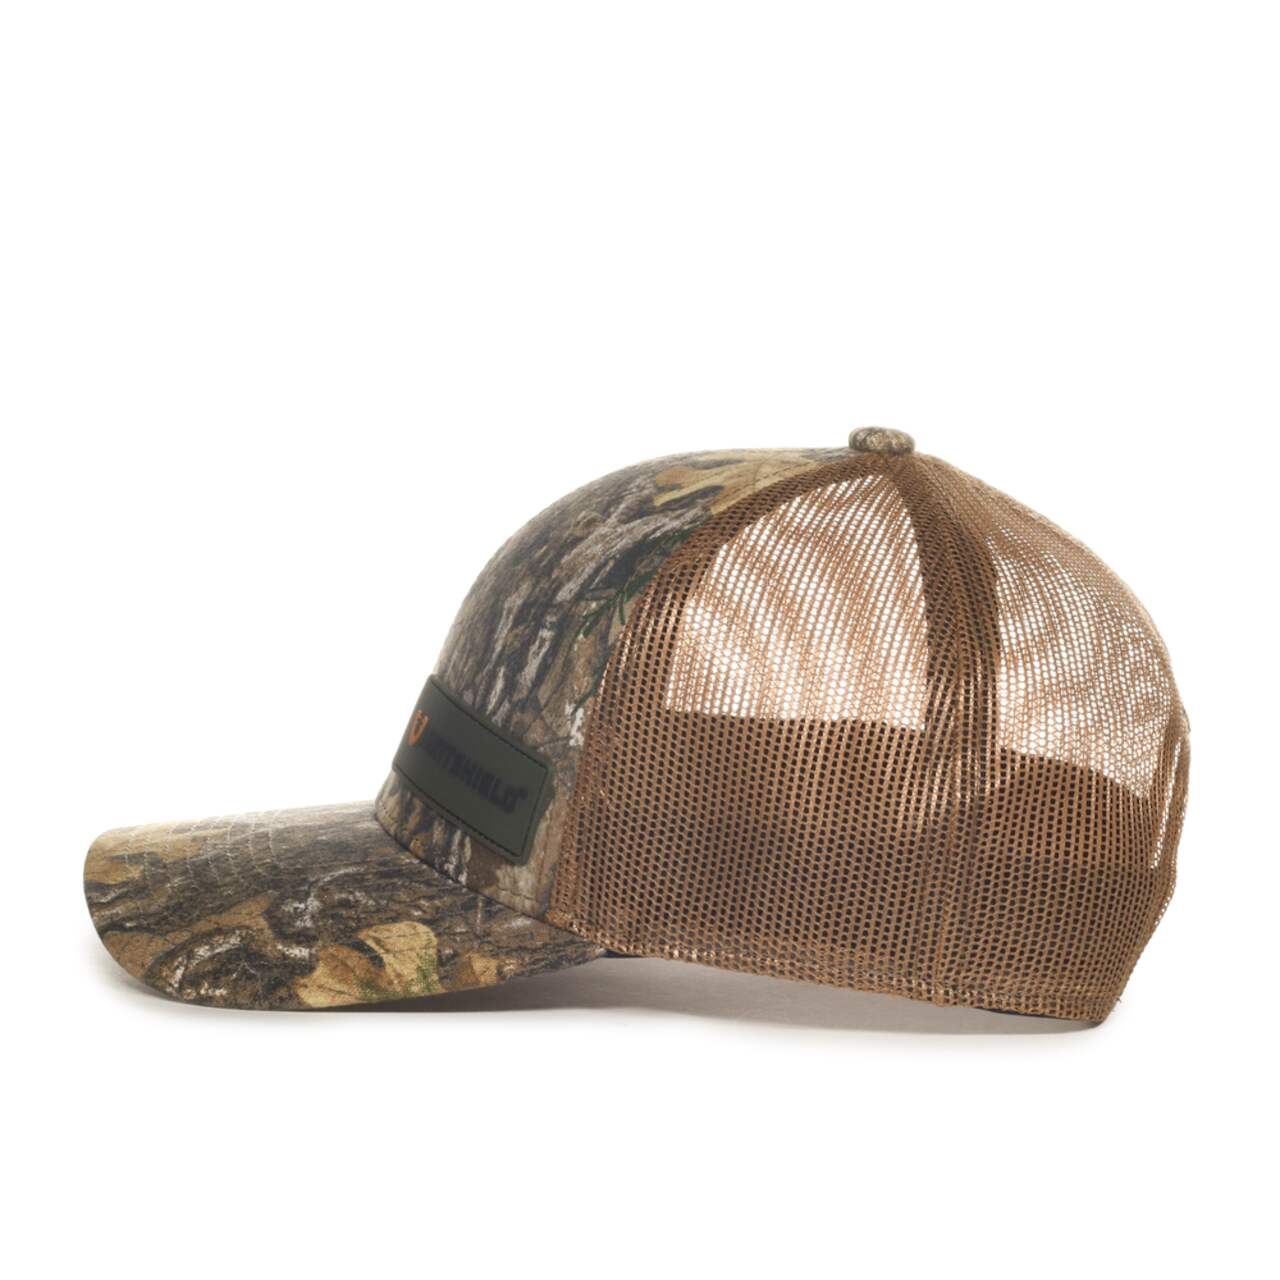 https://media-www.canadiantire.ca/product/playing/hunting/hunting-apparel-footwear/3751191/huntshield-silicone-patch-cap-rt-edge-brown-mesh-snap-back-3a40ec3f-88e9-4d9f-9fa8-da10bc92b452.png?imdensity=1&imwidth=640&impolicy=mZoom